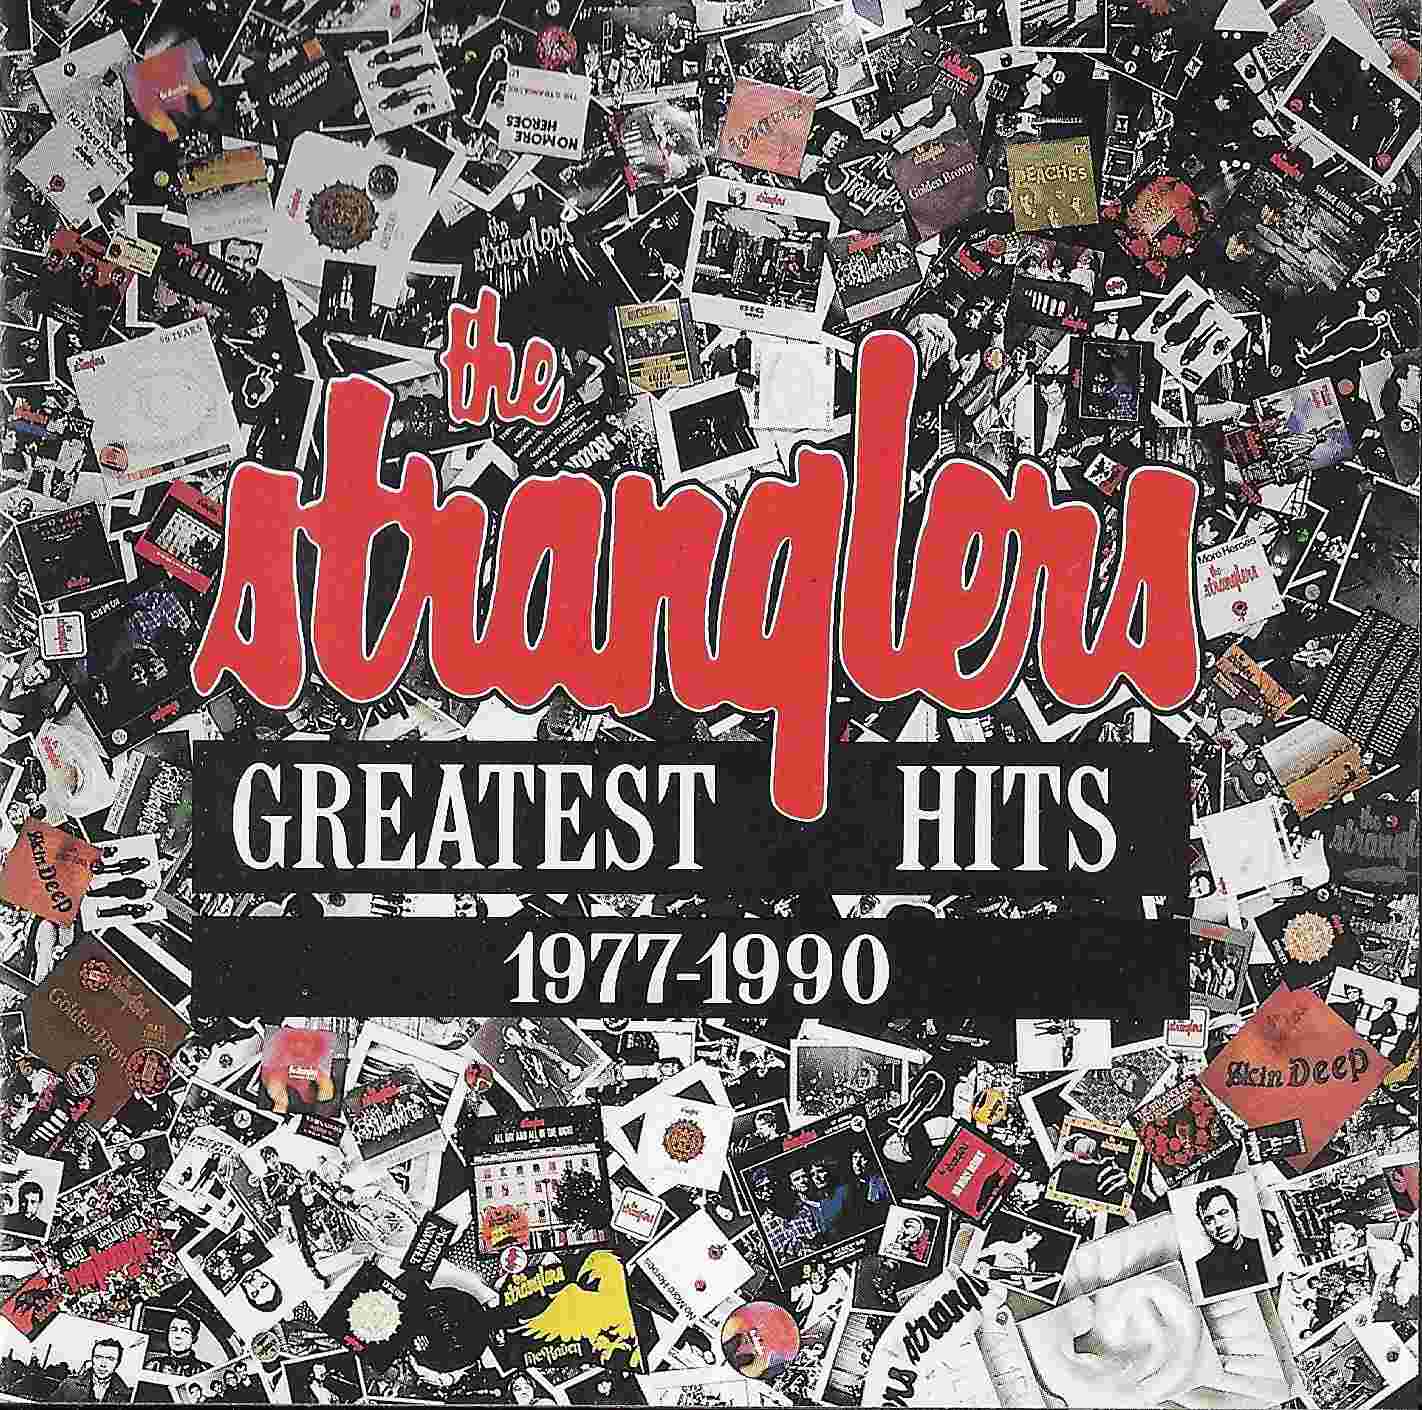 Picture of 467541 2 Greatest hits 1977 - 1990 by artist The Stranglers